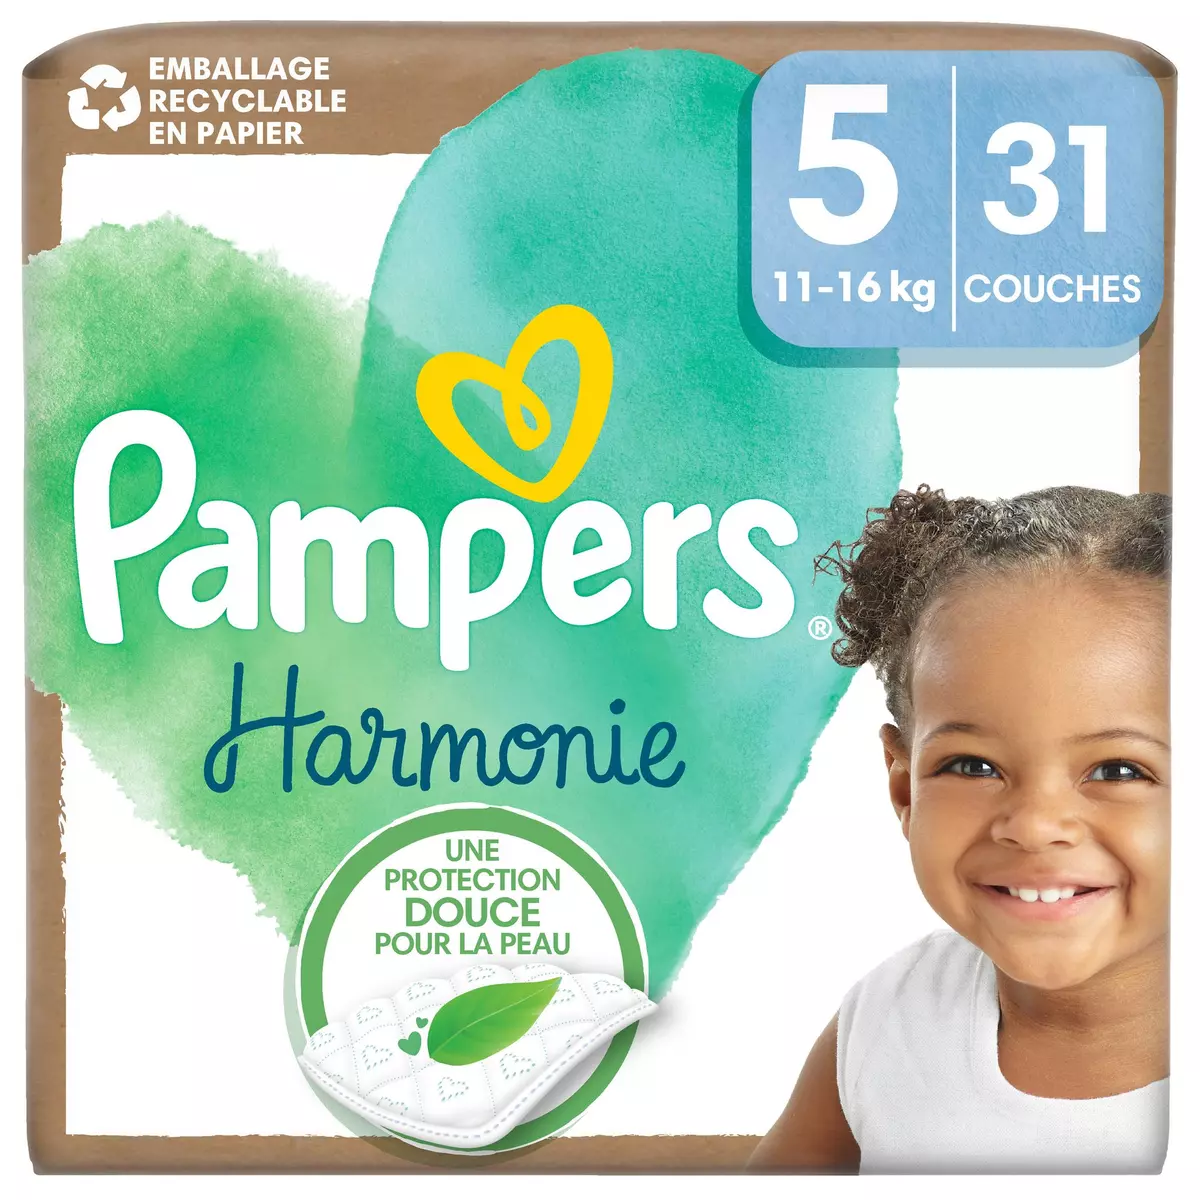 PAMPERS Harmonie Couches taille 5 (11-16kg) 31 couches